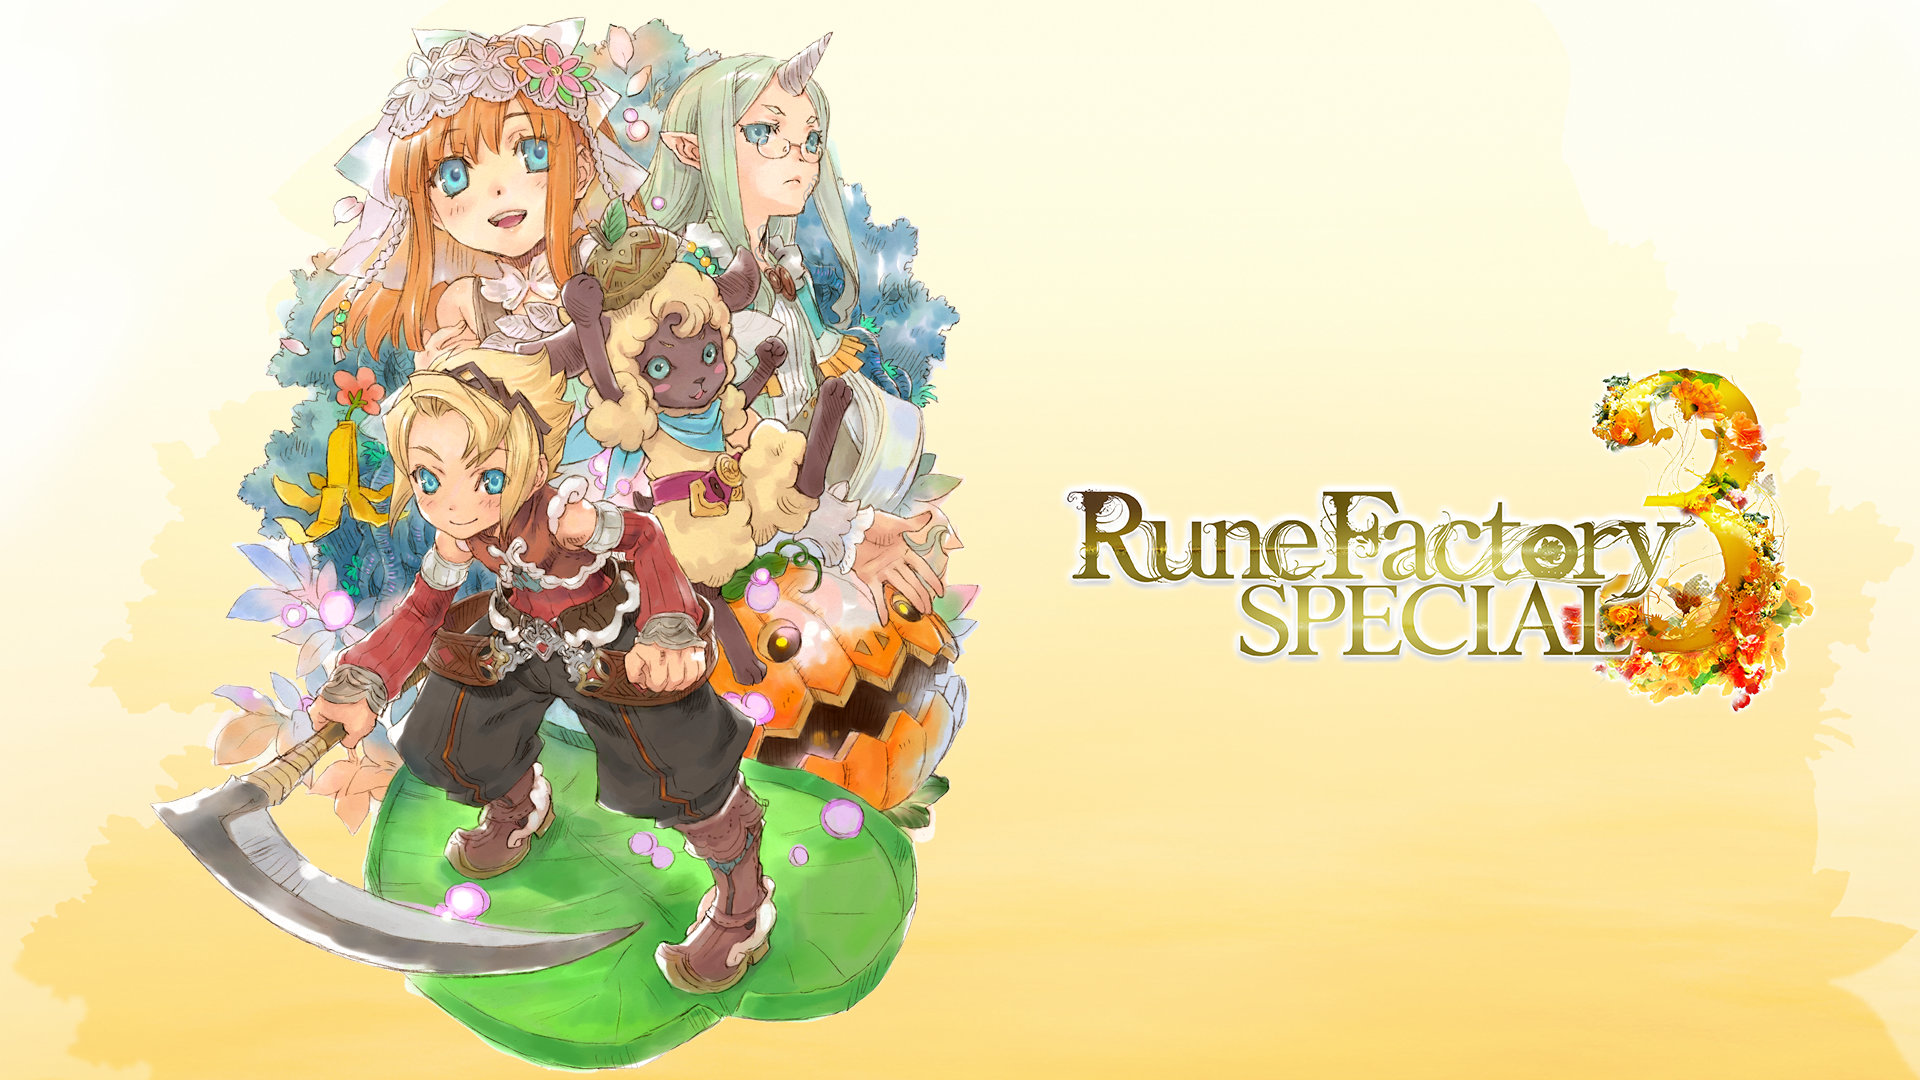 A screenshot of artwork depicting the logo of Rune Factory 3 Special in golden font, the three covered in a blooming kaleidoscope of orange and green flowers.